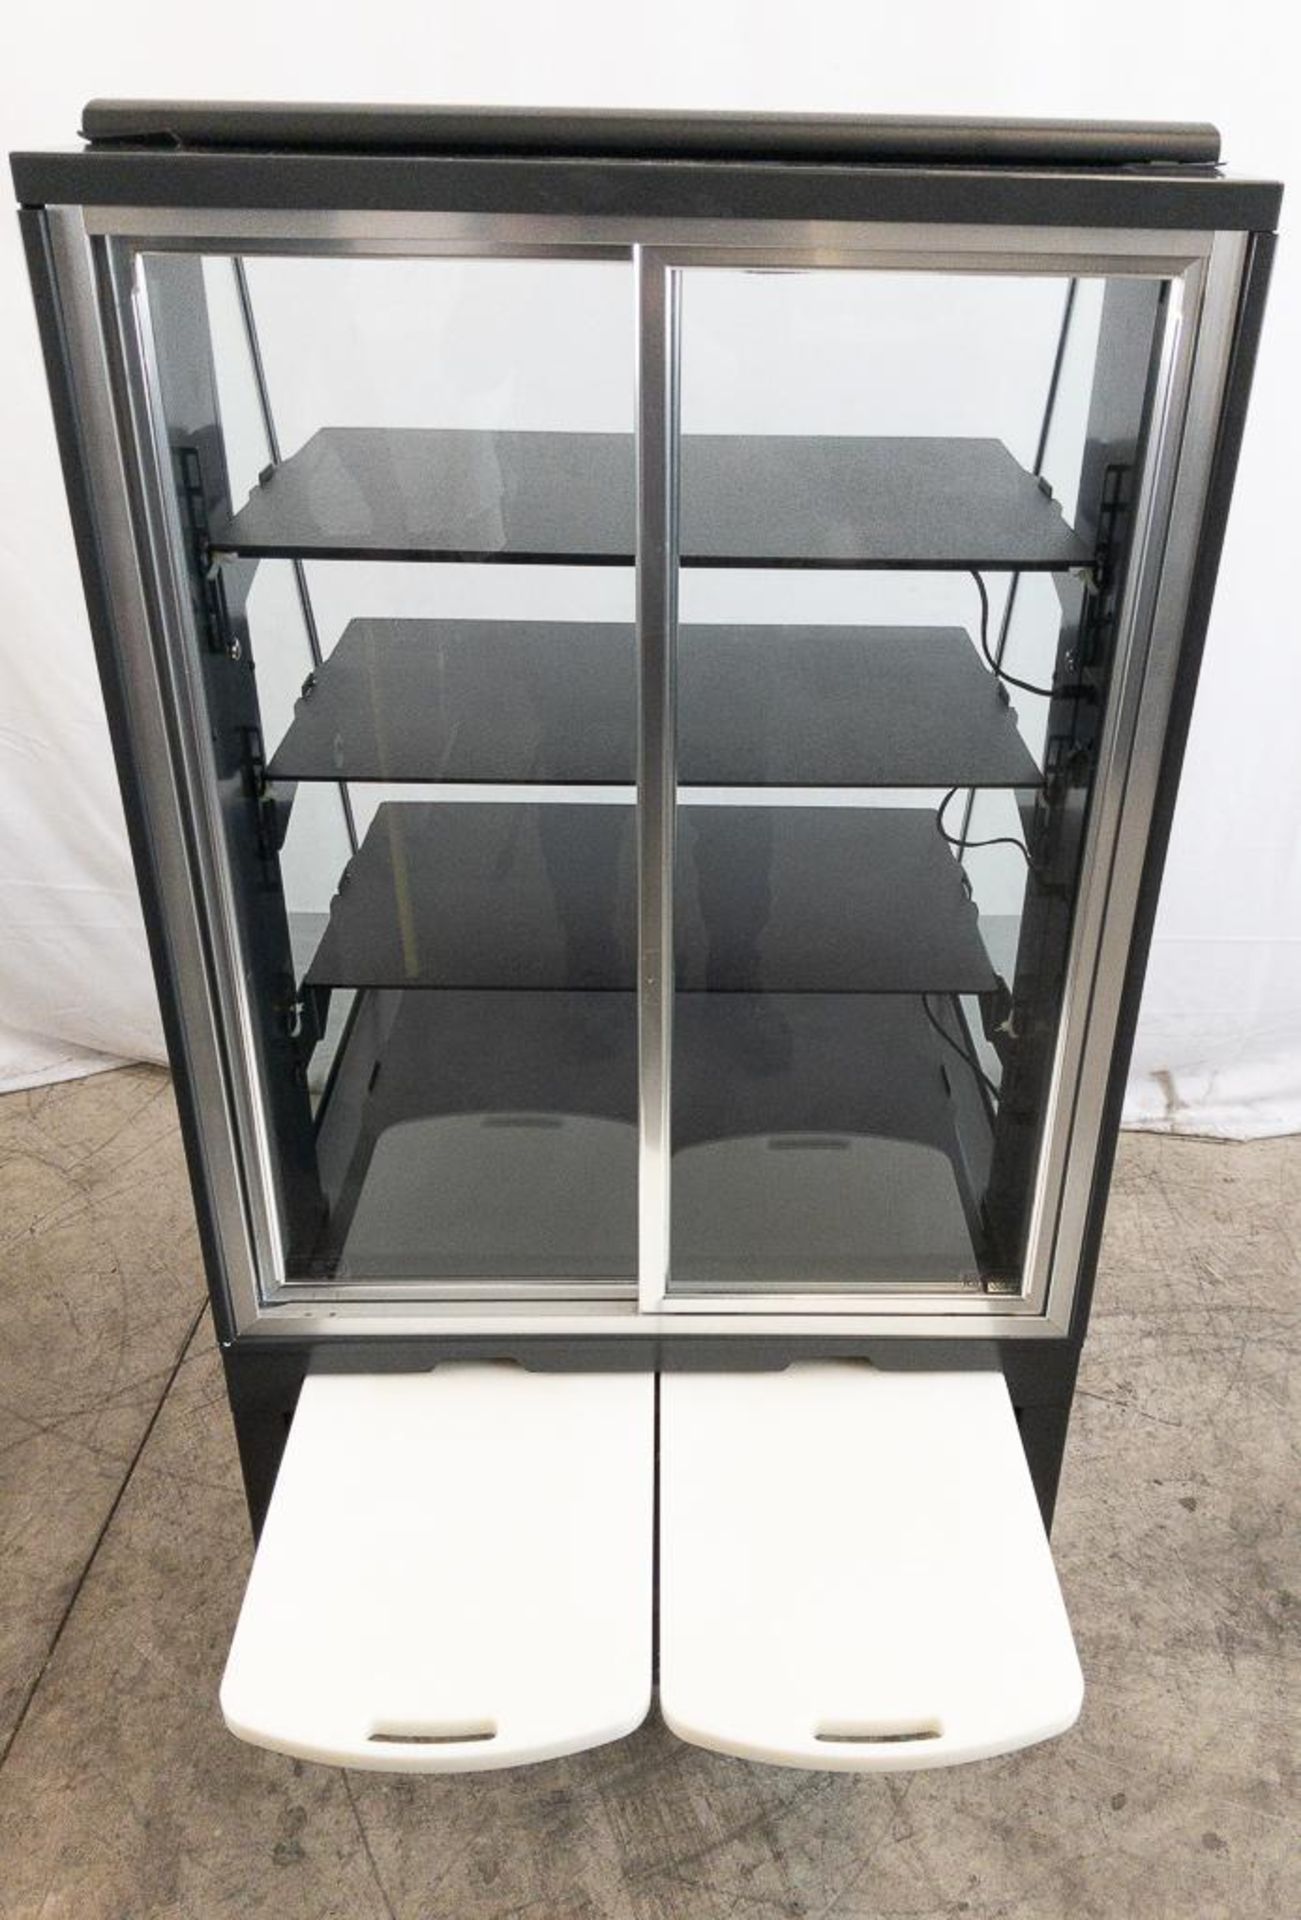 NEW STRUCTURAL CONCEPTS 27'' AMBIENT / DRY MERCHANDISER WITH CURVED GLASS FRONT - MODEL SB2755 - Image 7 of 11